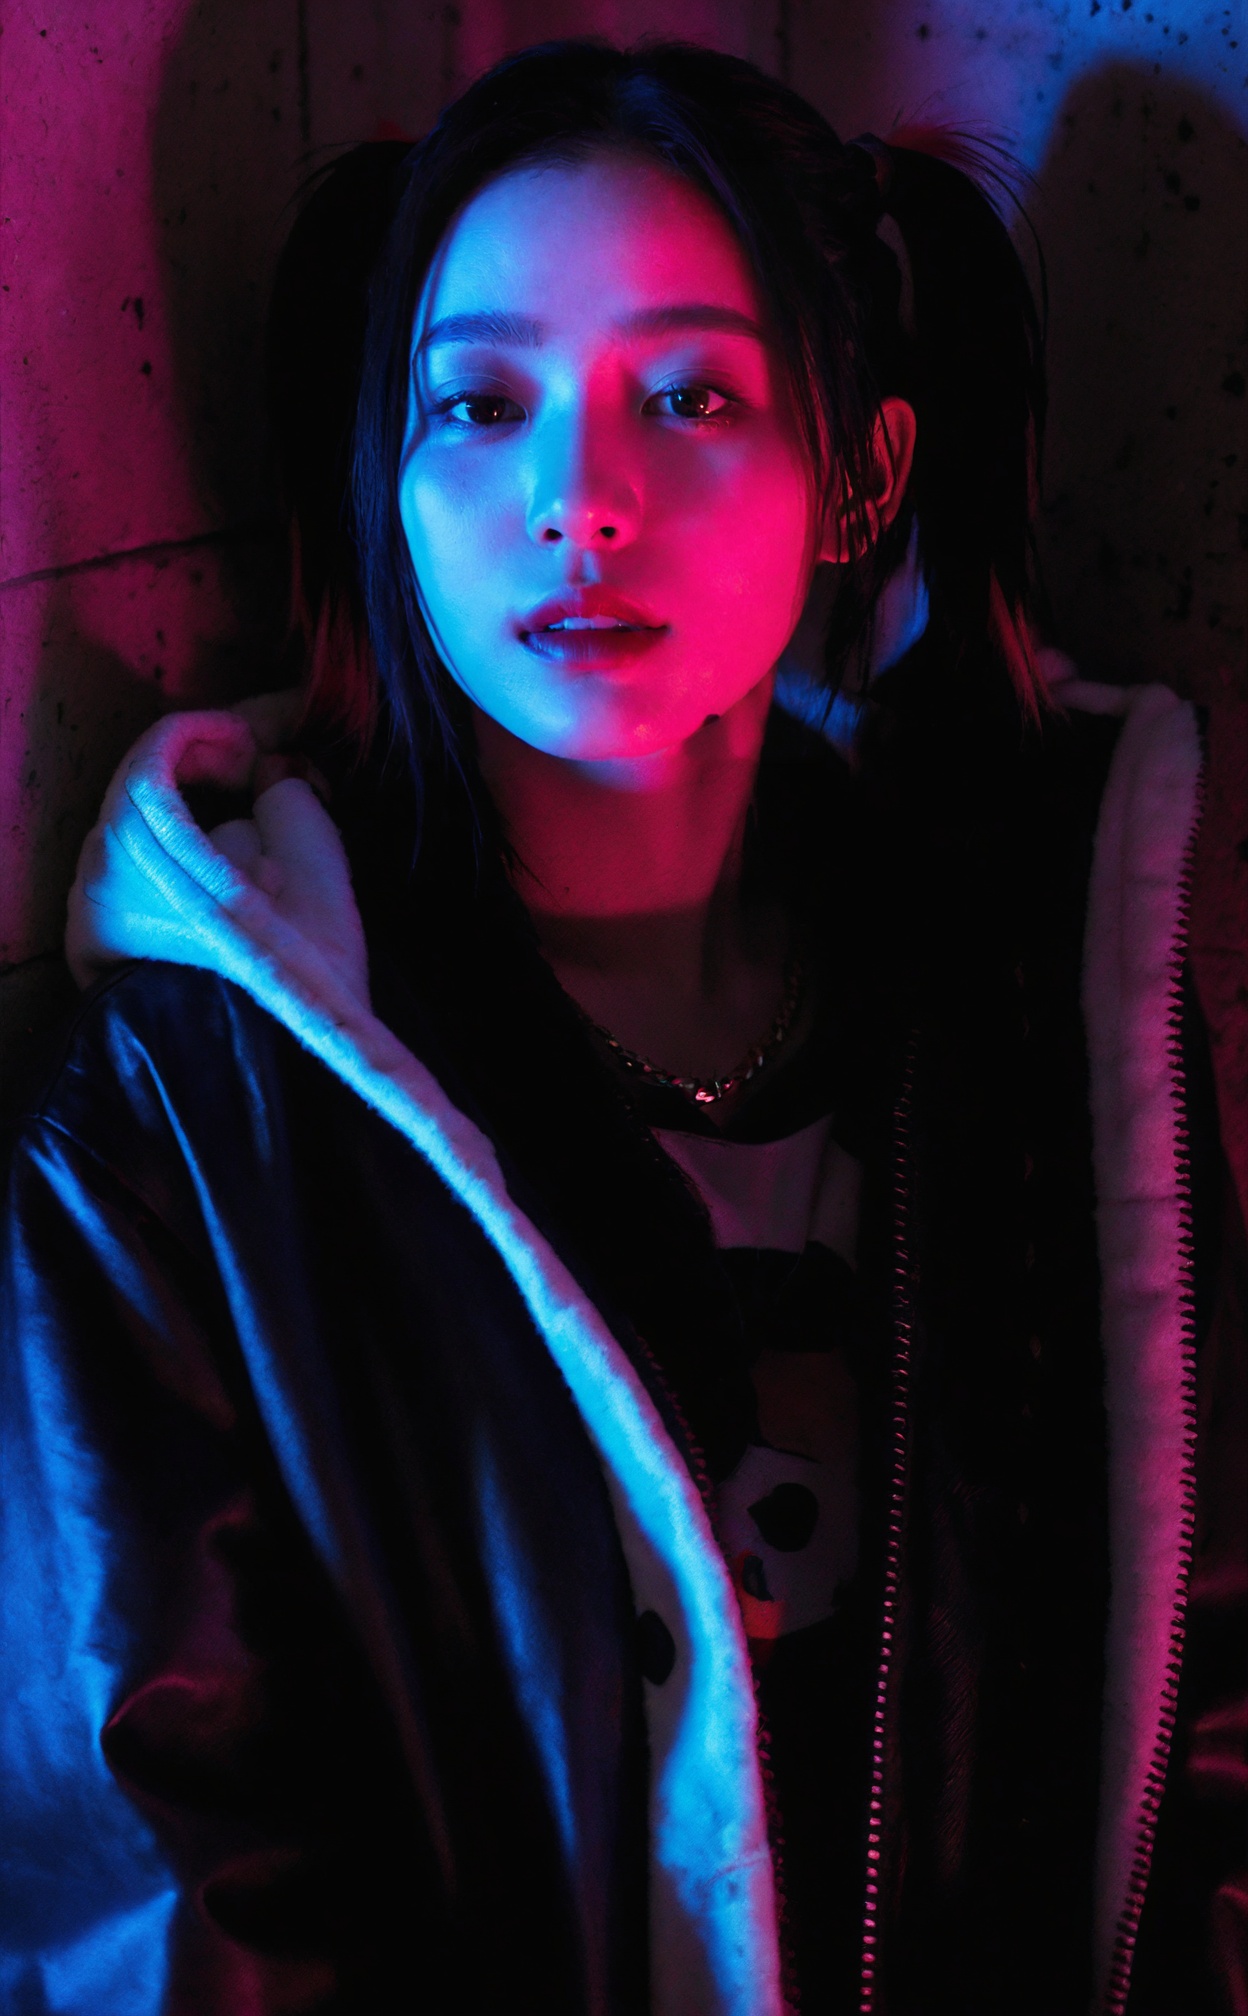 Harley Quinn in a dark and creepy cinematic adaptation, with high-quality visuals capturing the essence of her chaotic persona, portrayed in eerie lighting, alone and dangerous.korean girl,black hair,mugglelight,